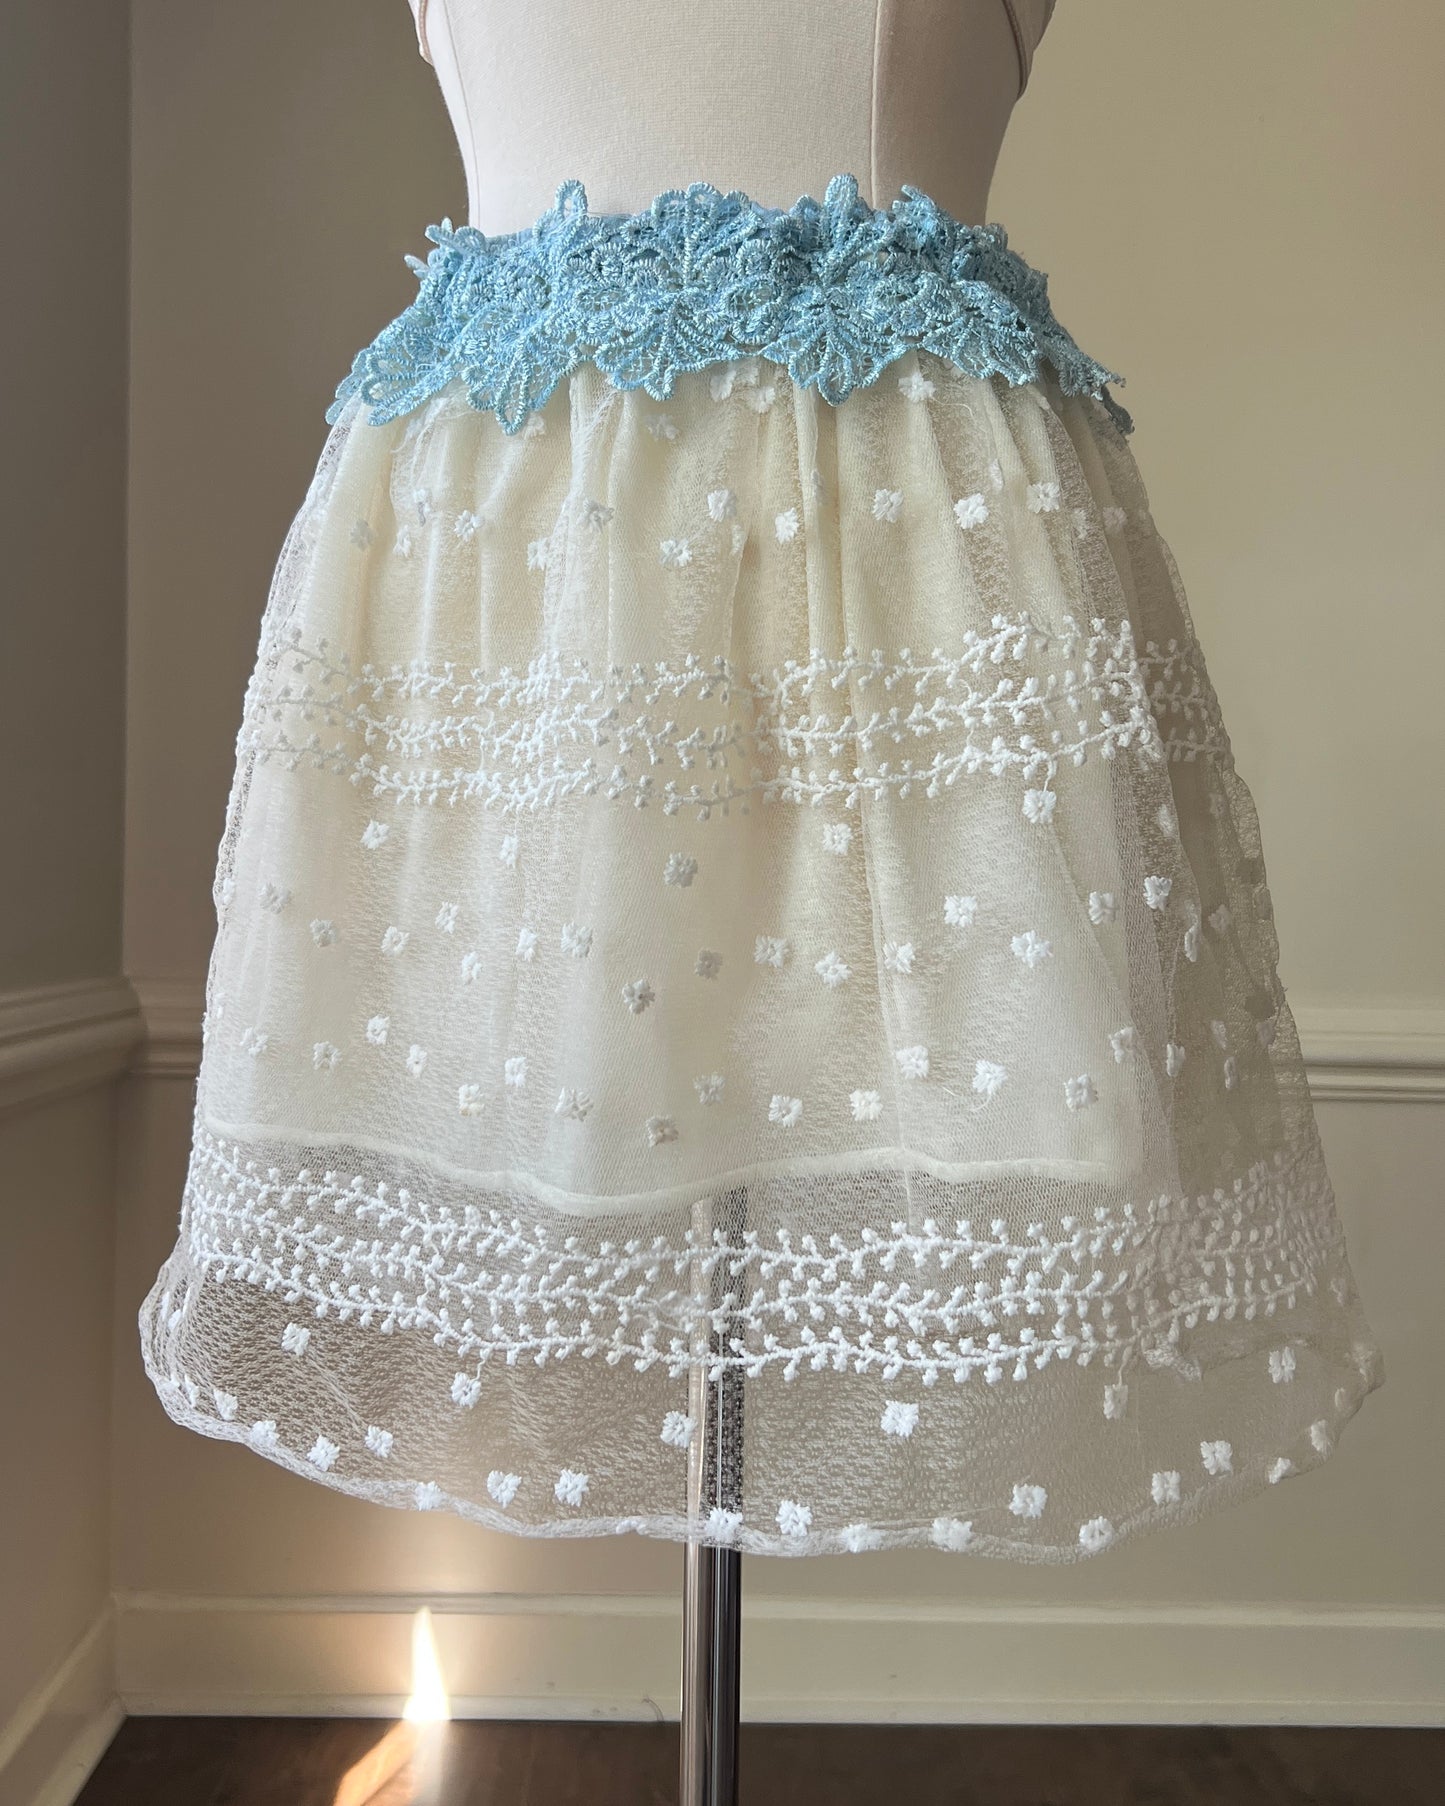 Adorable Sheer Fairy Skirt featuring Sheer Outer Layer with Leafy Embroidery and a Blue Floral Waist